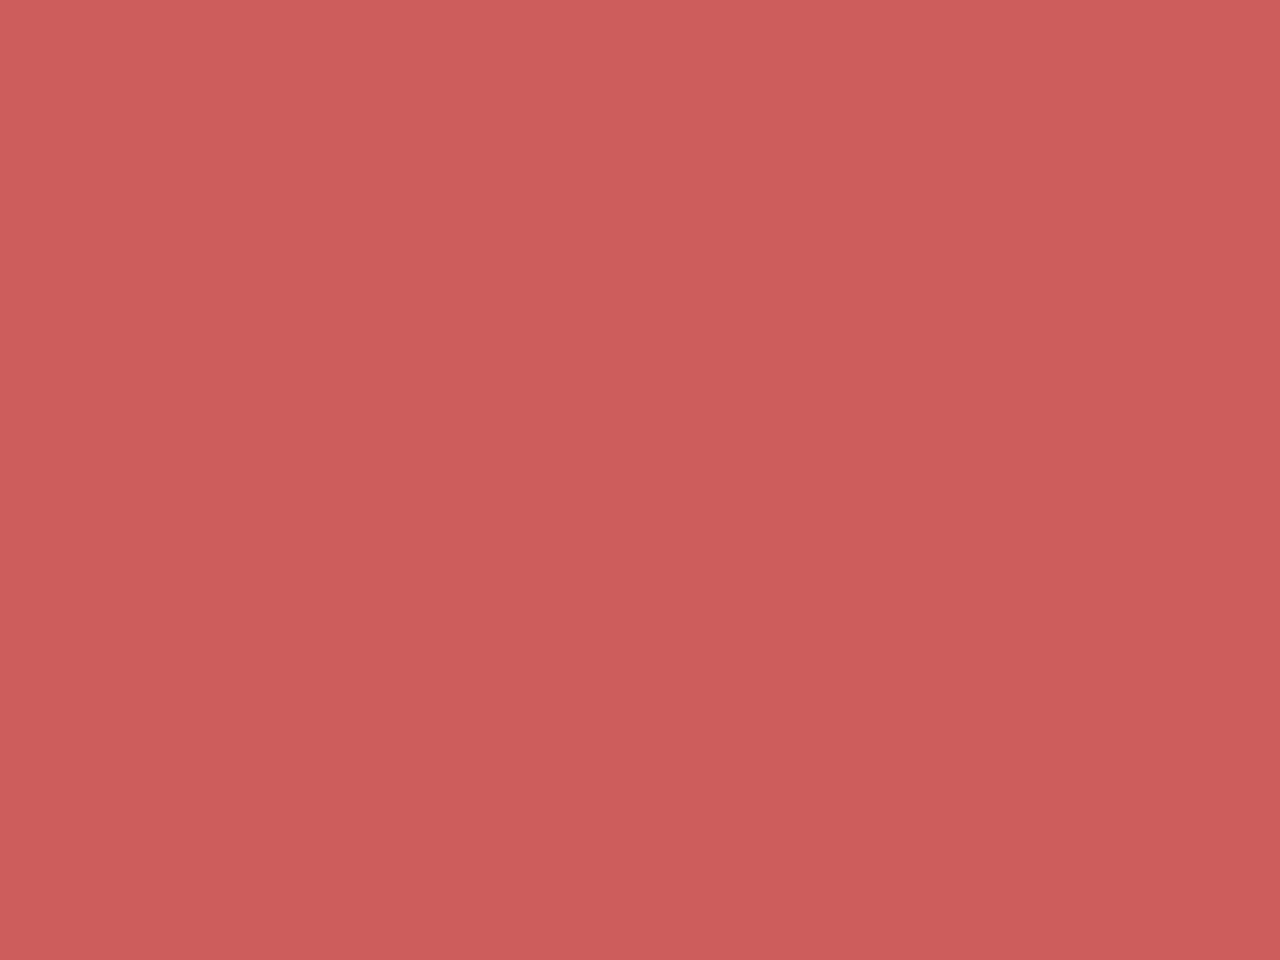 1280x960 Indian Red Solid Color Background